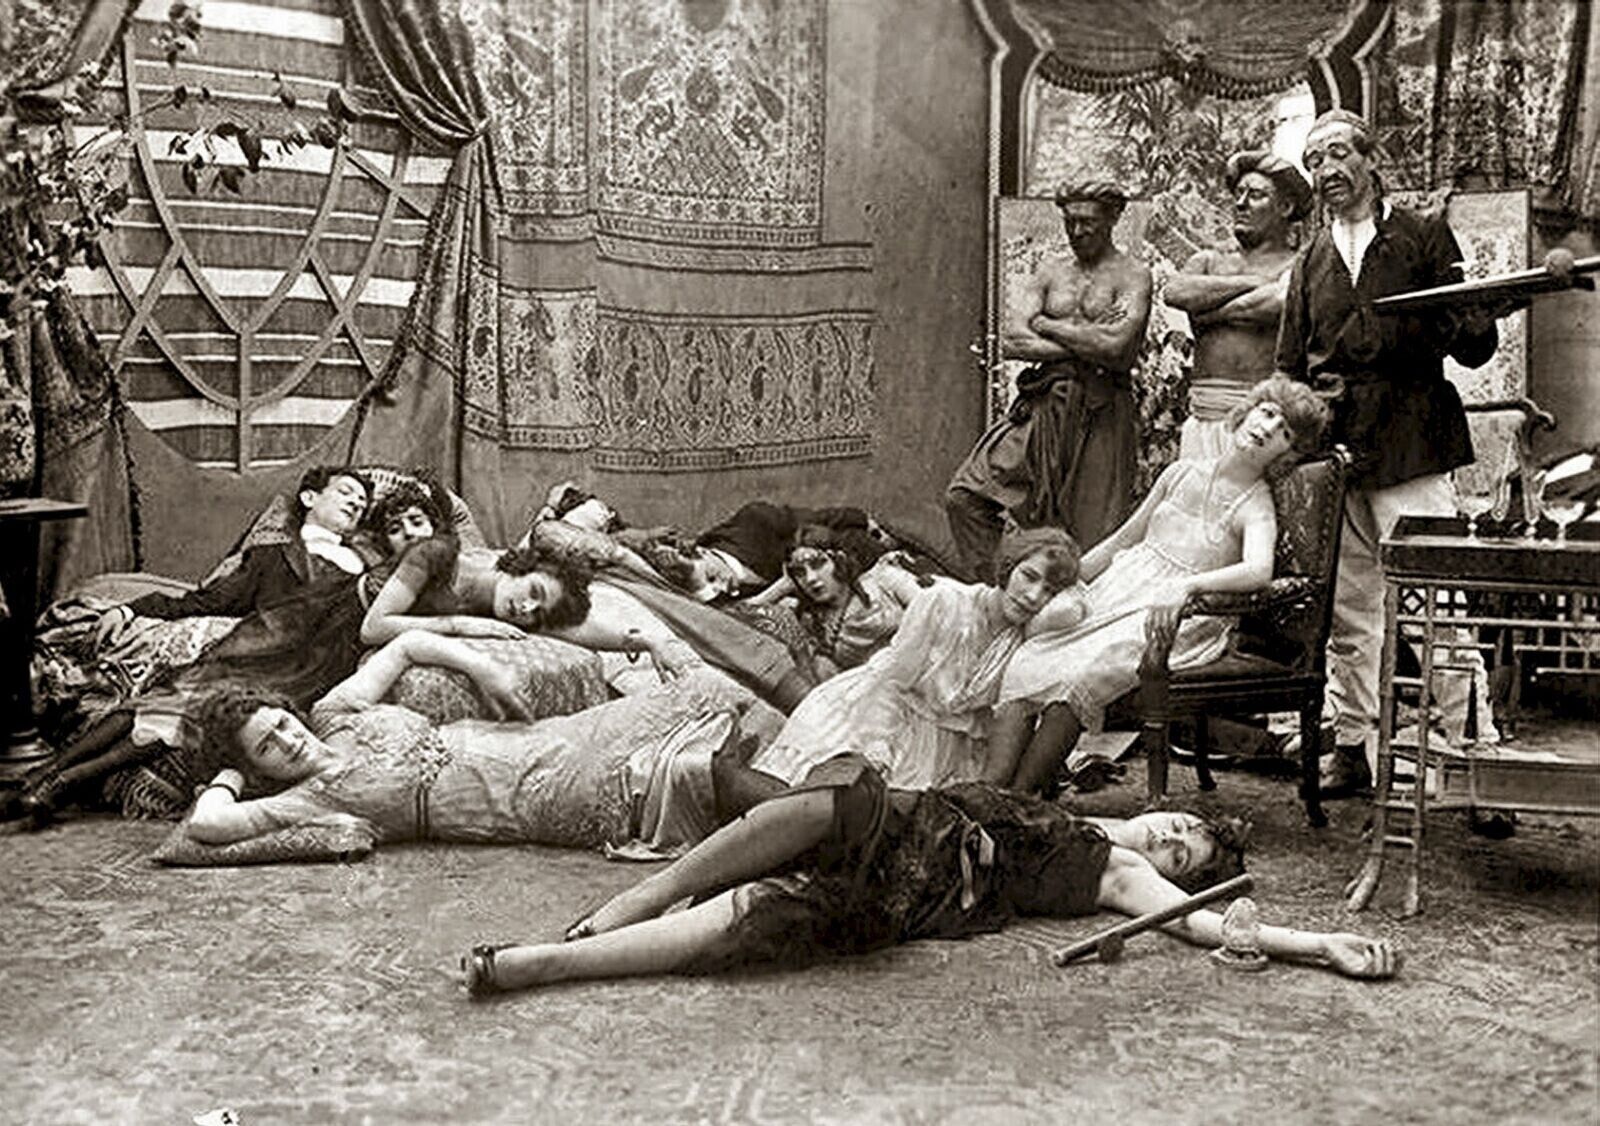 1918 FRENCH OPIUM Den Drug Party Classic Historic Picture Photo 4x6